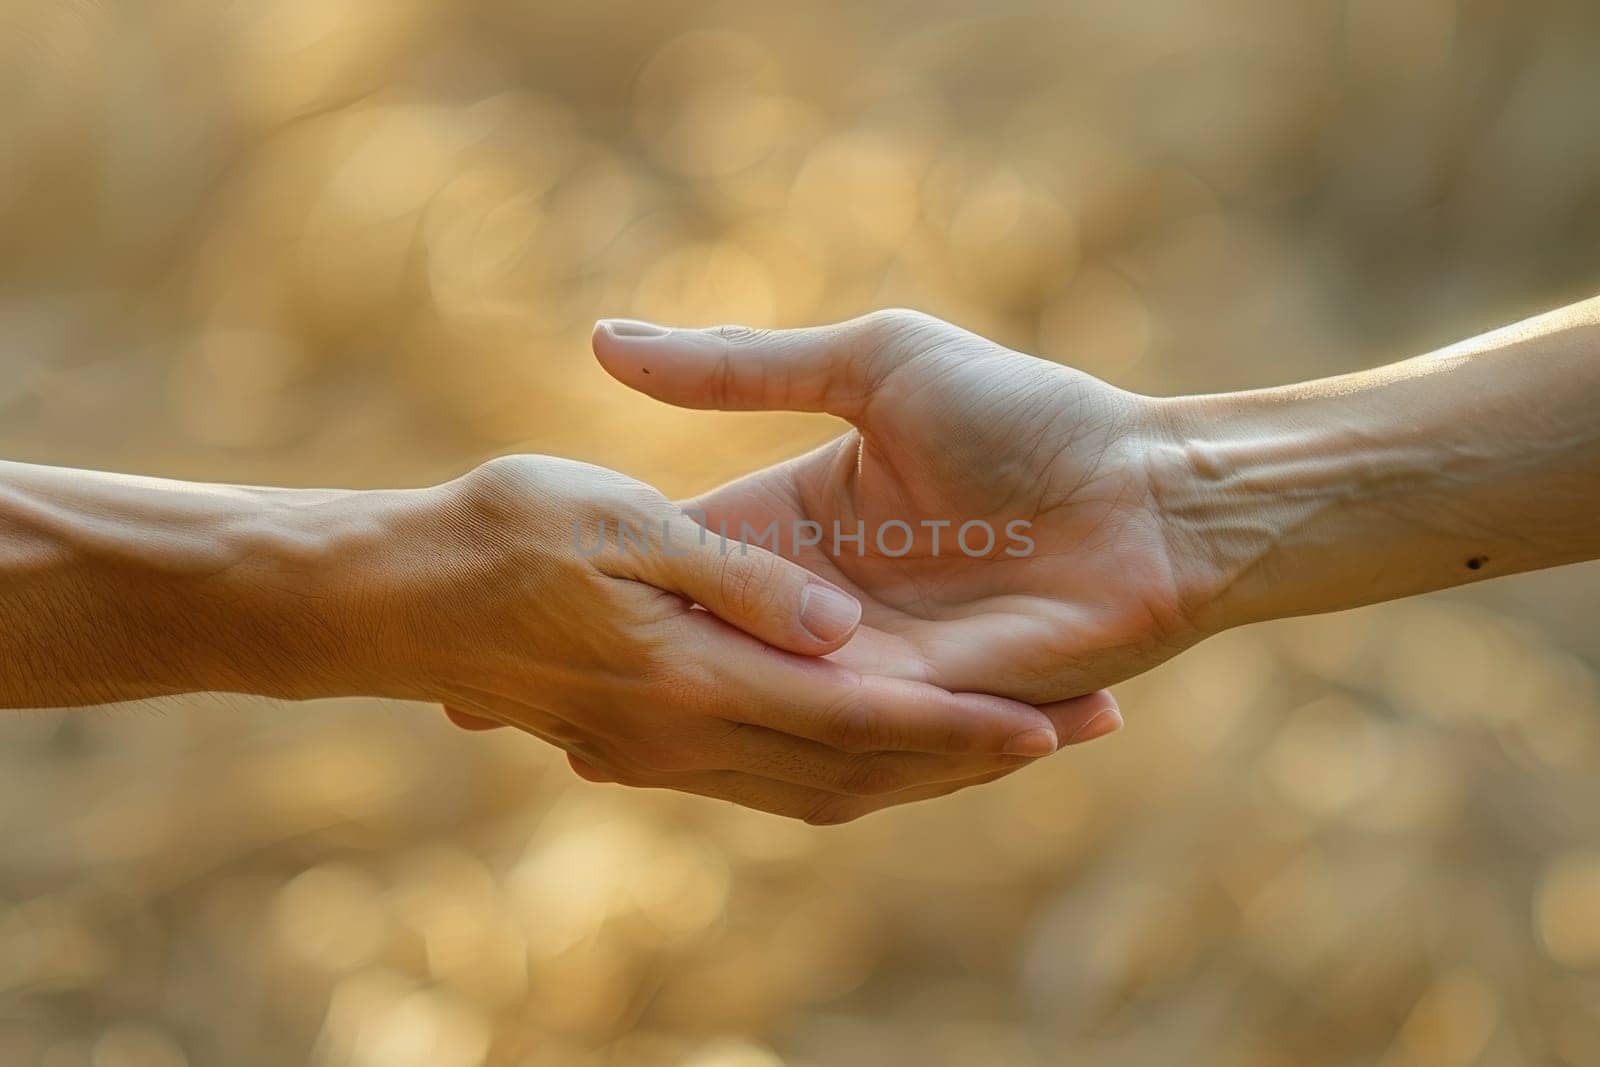 Two hands clasping together, one of which is a woman's. The other hand is a man's. Concept of warmth and connection between the two people